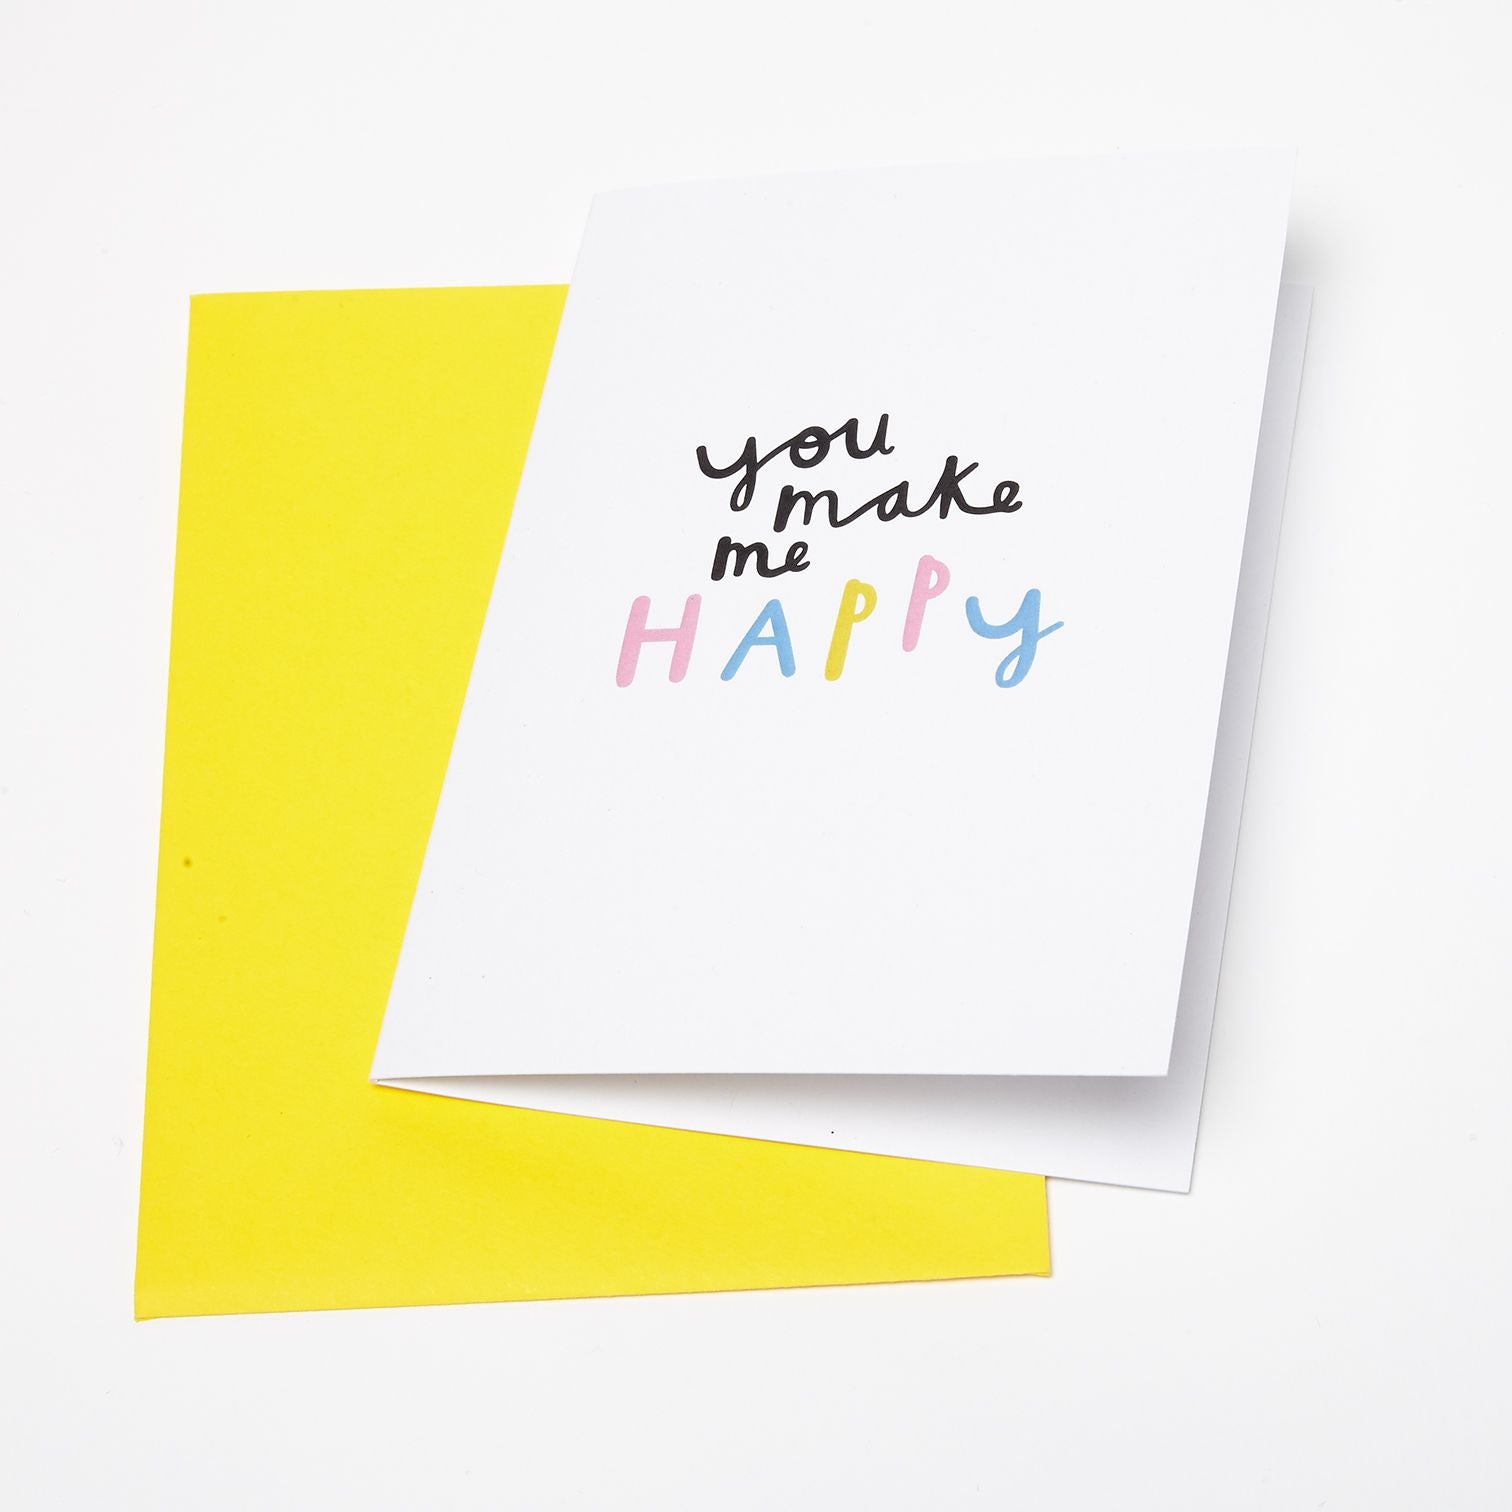 You make me happy - A6 Greetings card- Planet-friendly materials